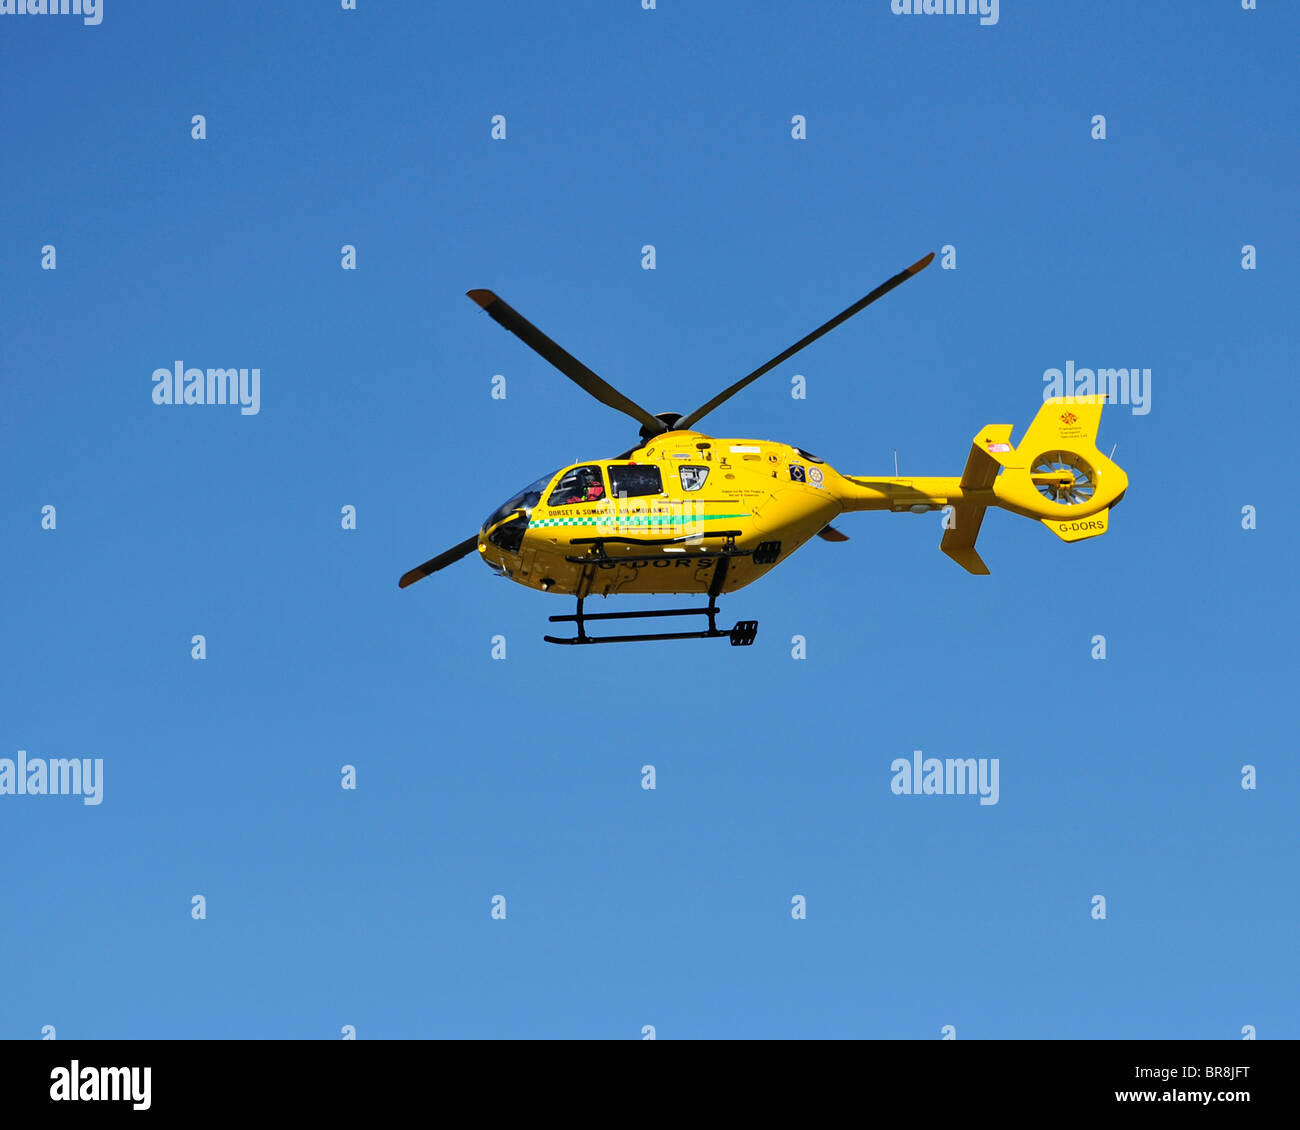 air ambulance helicopter Stock Photo